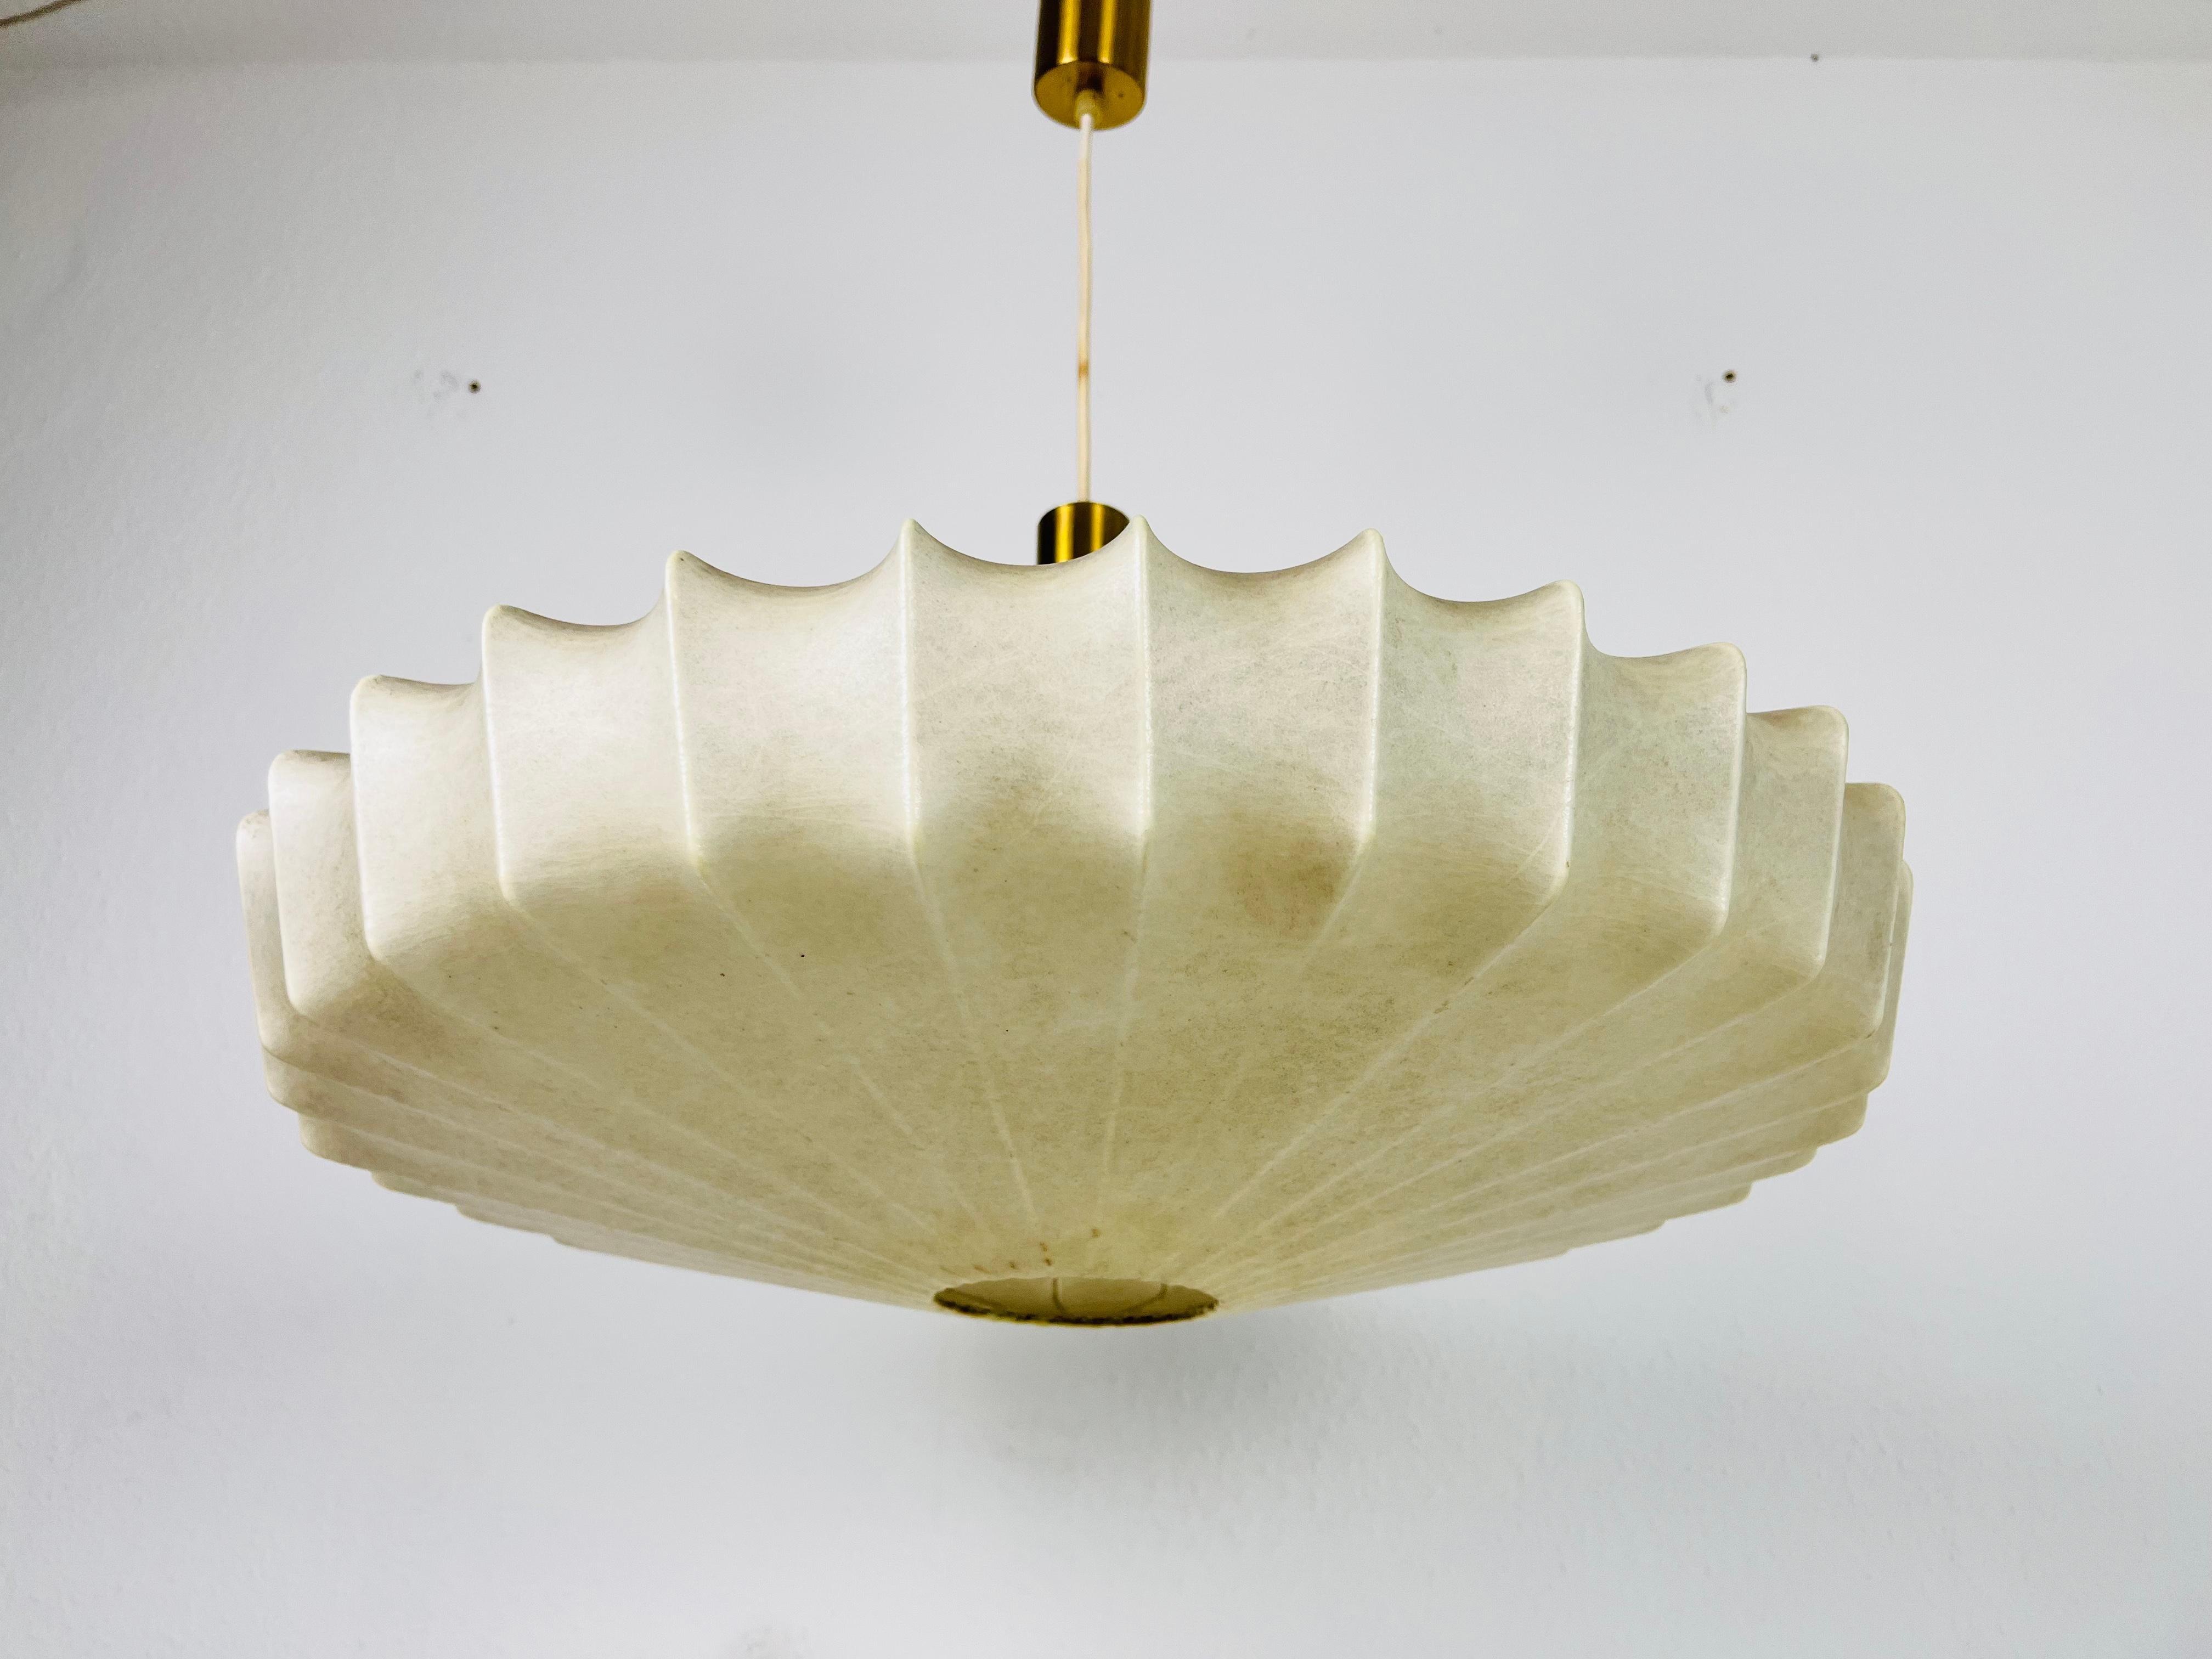 A cocoon pendant lamp made in Italy in the 1960s. The hanging lamp has a design similar to the lightings made by Achille Castiglioni. The lamp shade is made of original resin and has a losange shape.

Measurements:
Height: 35-65 cm
Diameter: 56